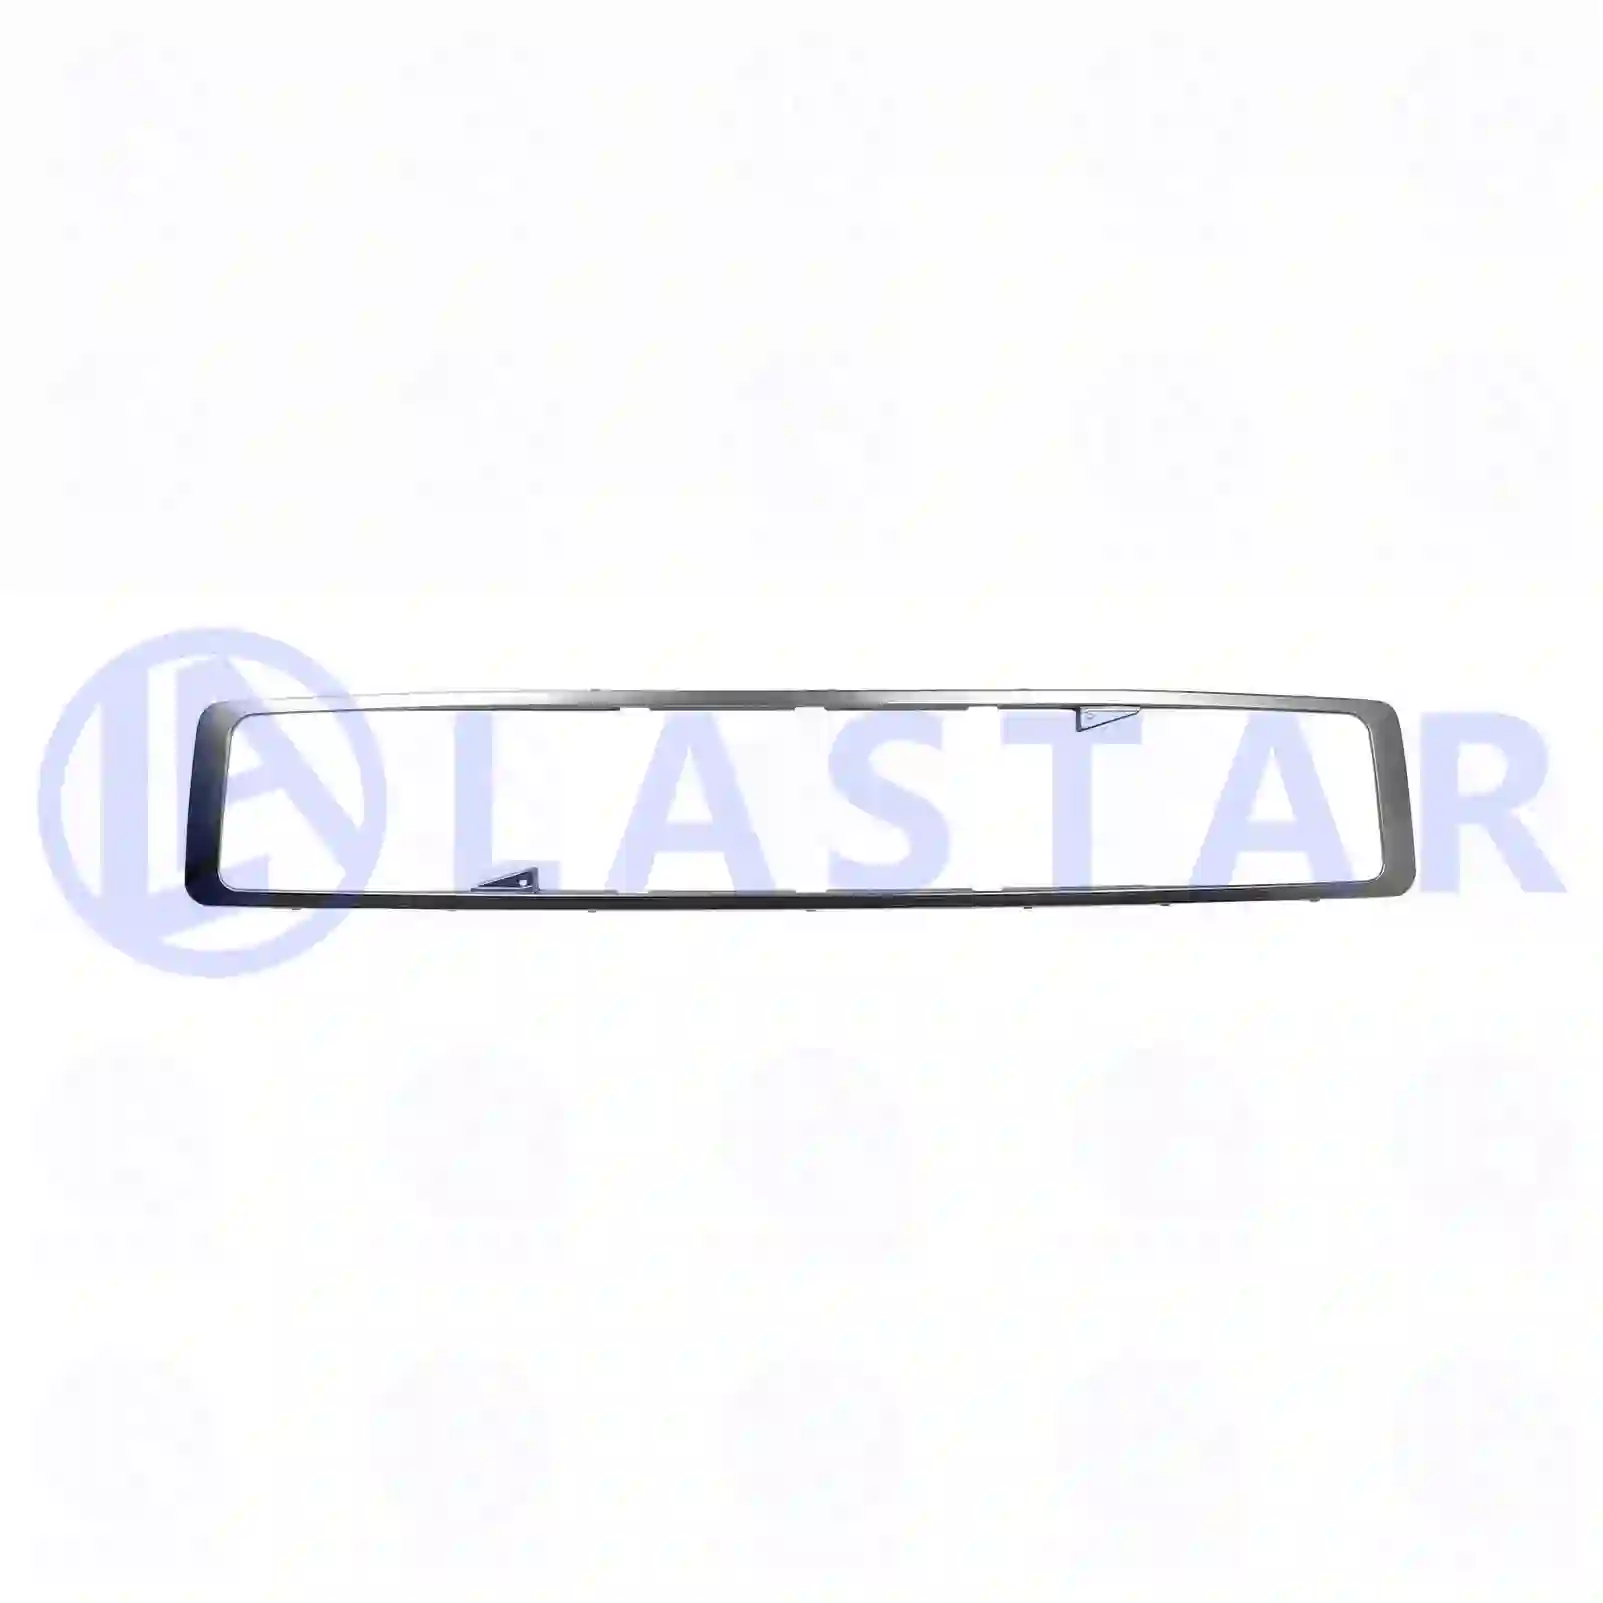 Frame, front grill, 77721089, 20566935, 2088877 ||  77721089 Lastar Spare Part | Truck Spare Parts, Auotomotive Spare Parts Frame, front grill, 77721089, 20566935, 2088877 ||  77721089 Lastar Spare Part | Truck Spare Parts, Auotomotive Spare Parts